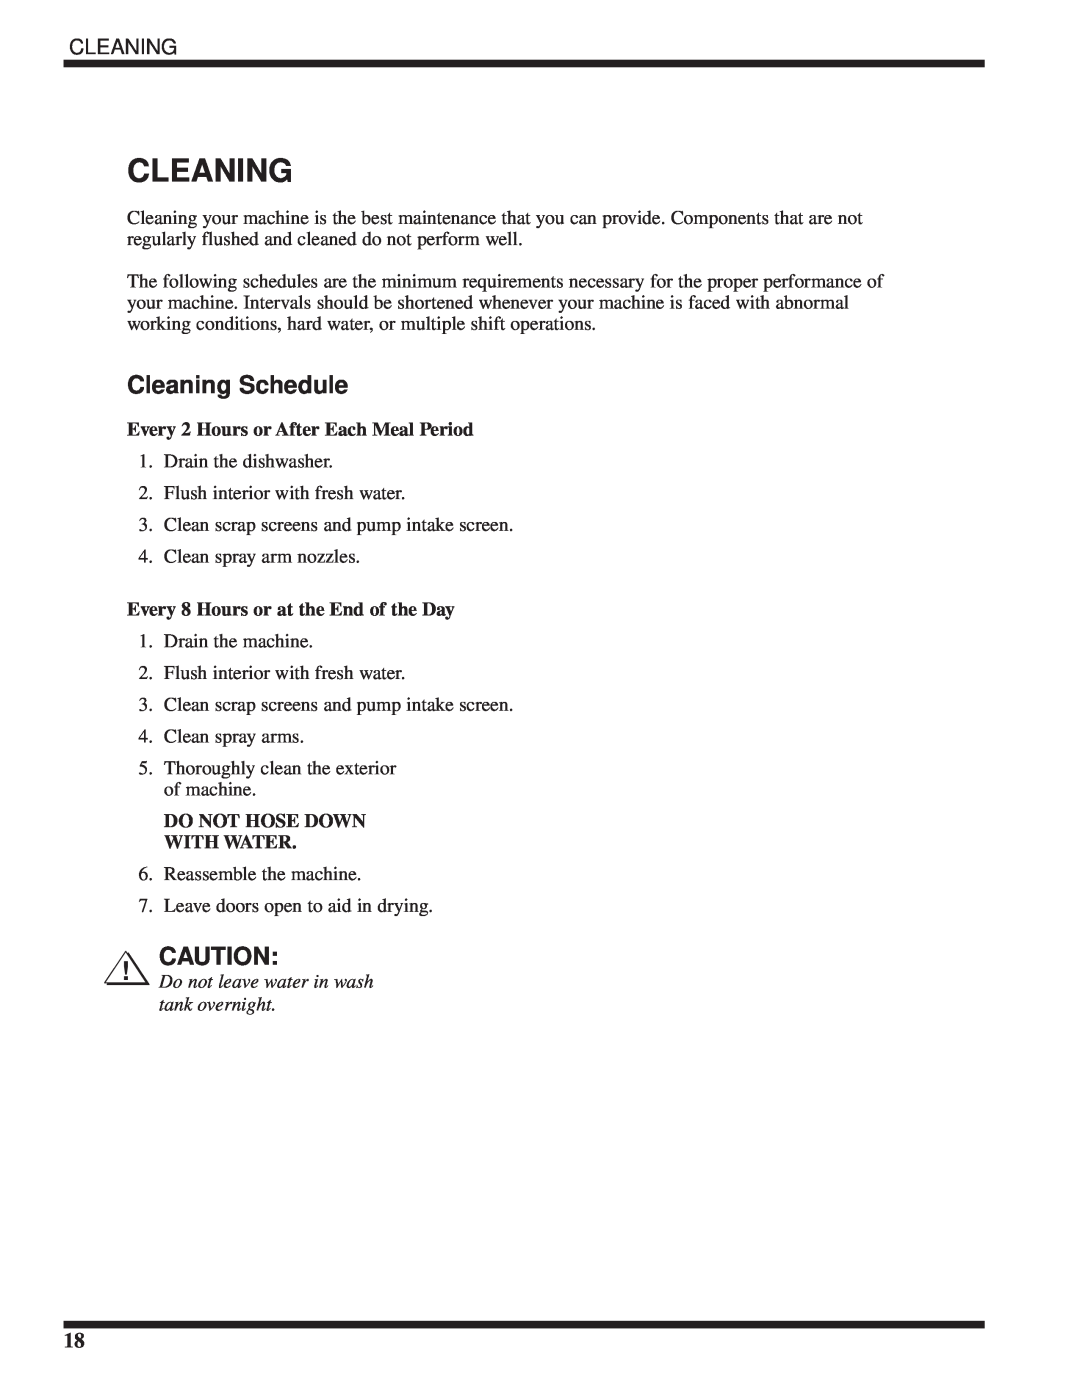 Moyer Diebel MH-60M5, MH-6NM5, MH-6LM5 technical manual Cleaning Schedule, Every 2 Hours or After Each Meal Period 